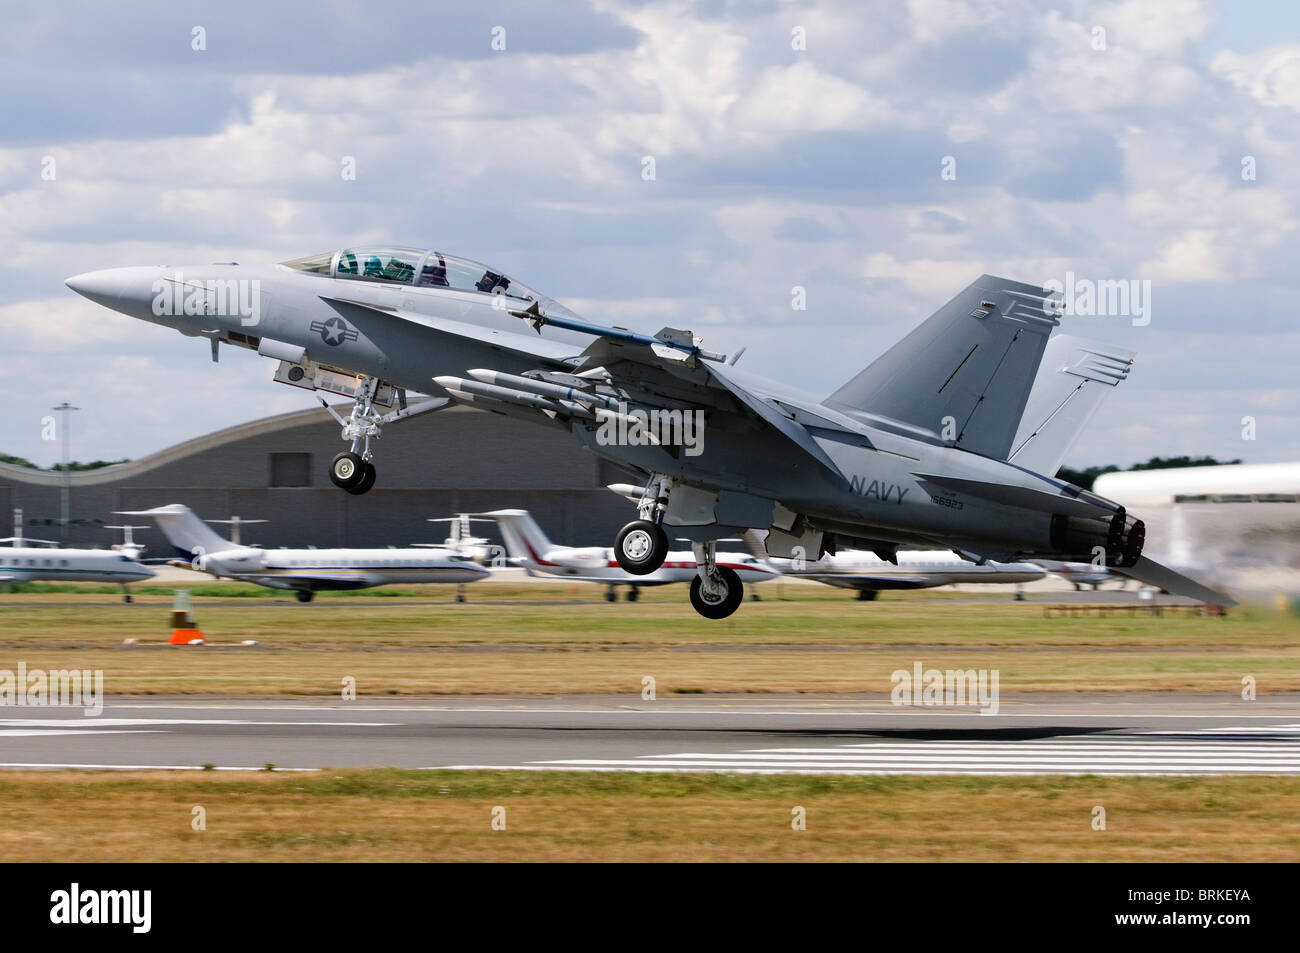 Boeing F/A-18F Super Hornet operated by the US Navy taking off at Farnborough Airshow, Farnborough, UK. Stock Photo